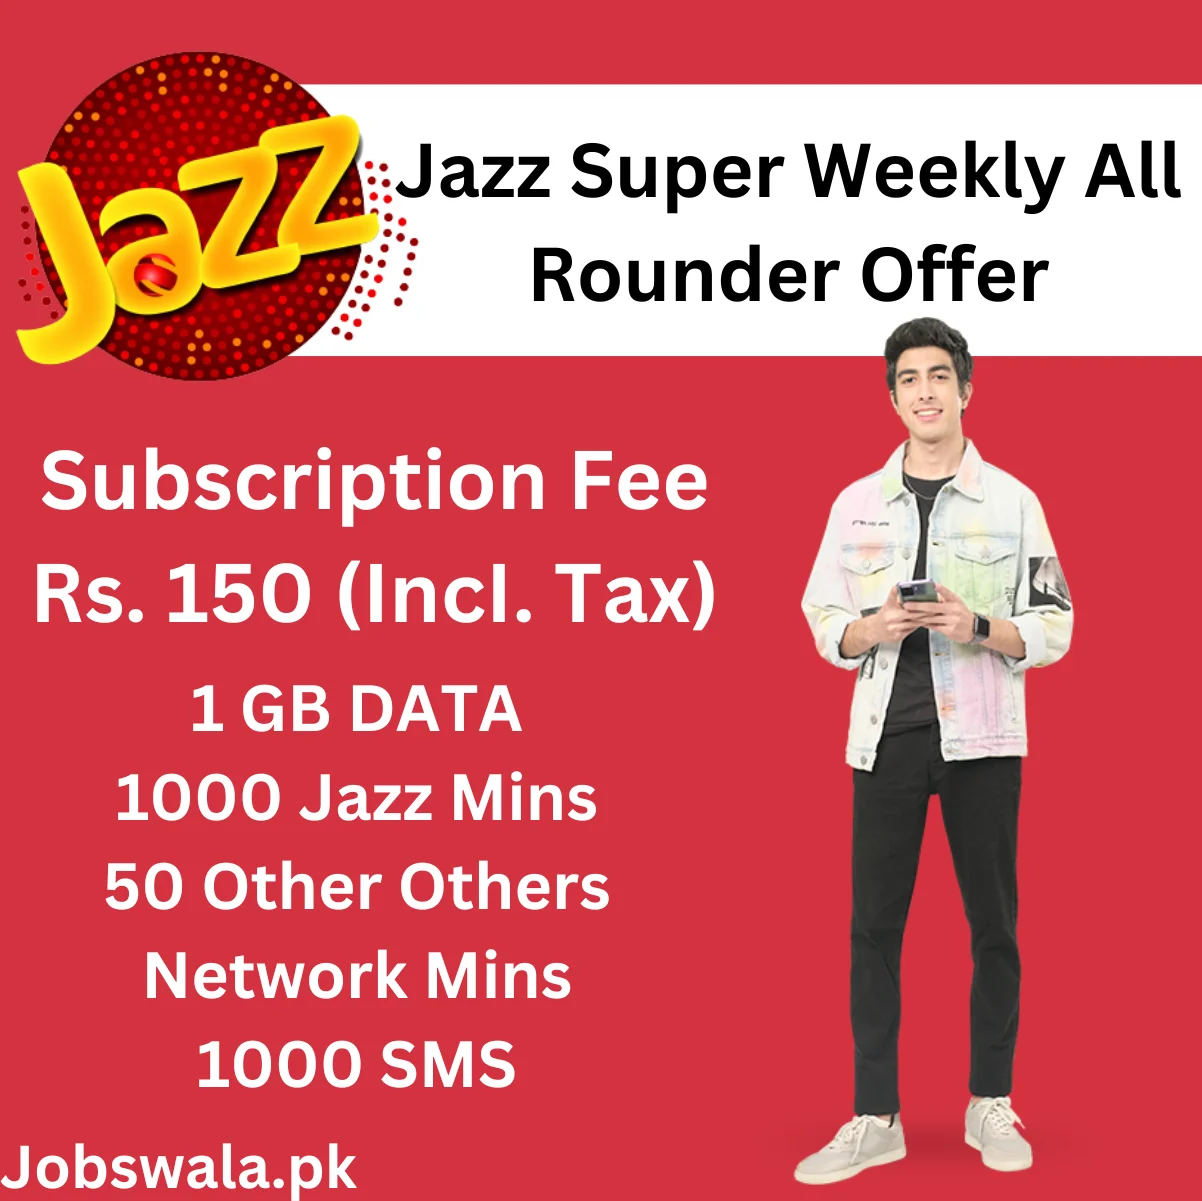 Jazz Super Weekly All Rounder Offer